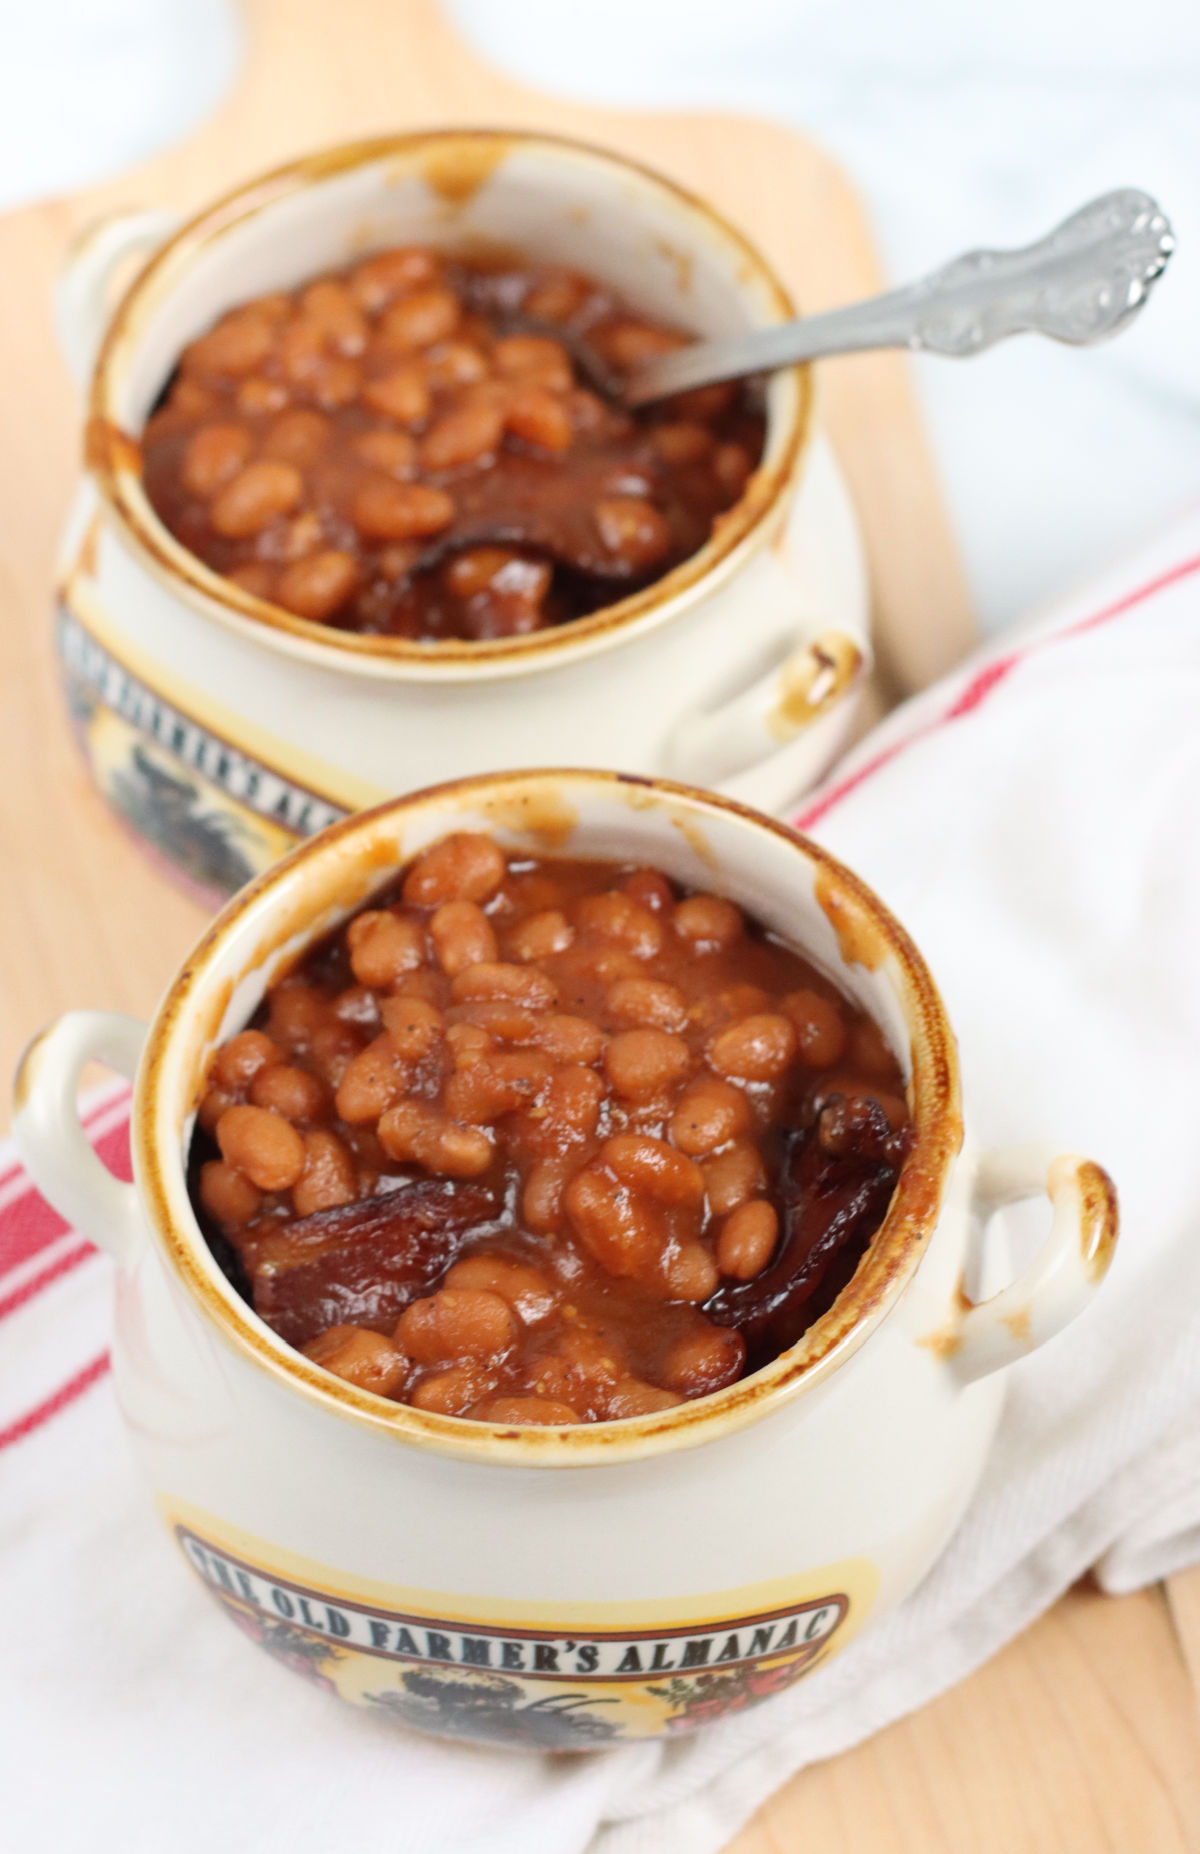 Baked beans in small crocks on wooden cutting board.